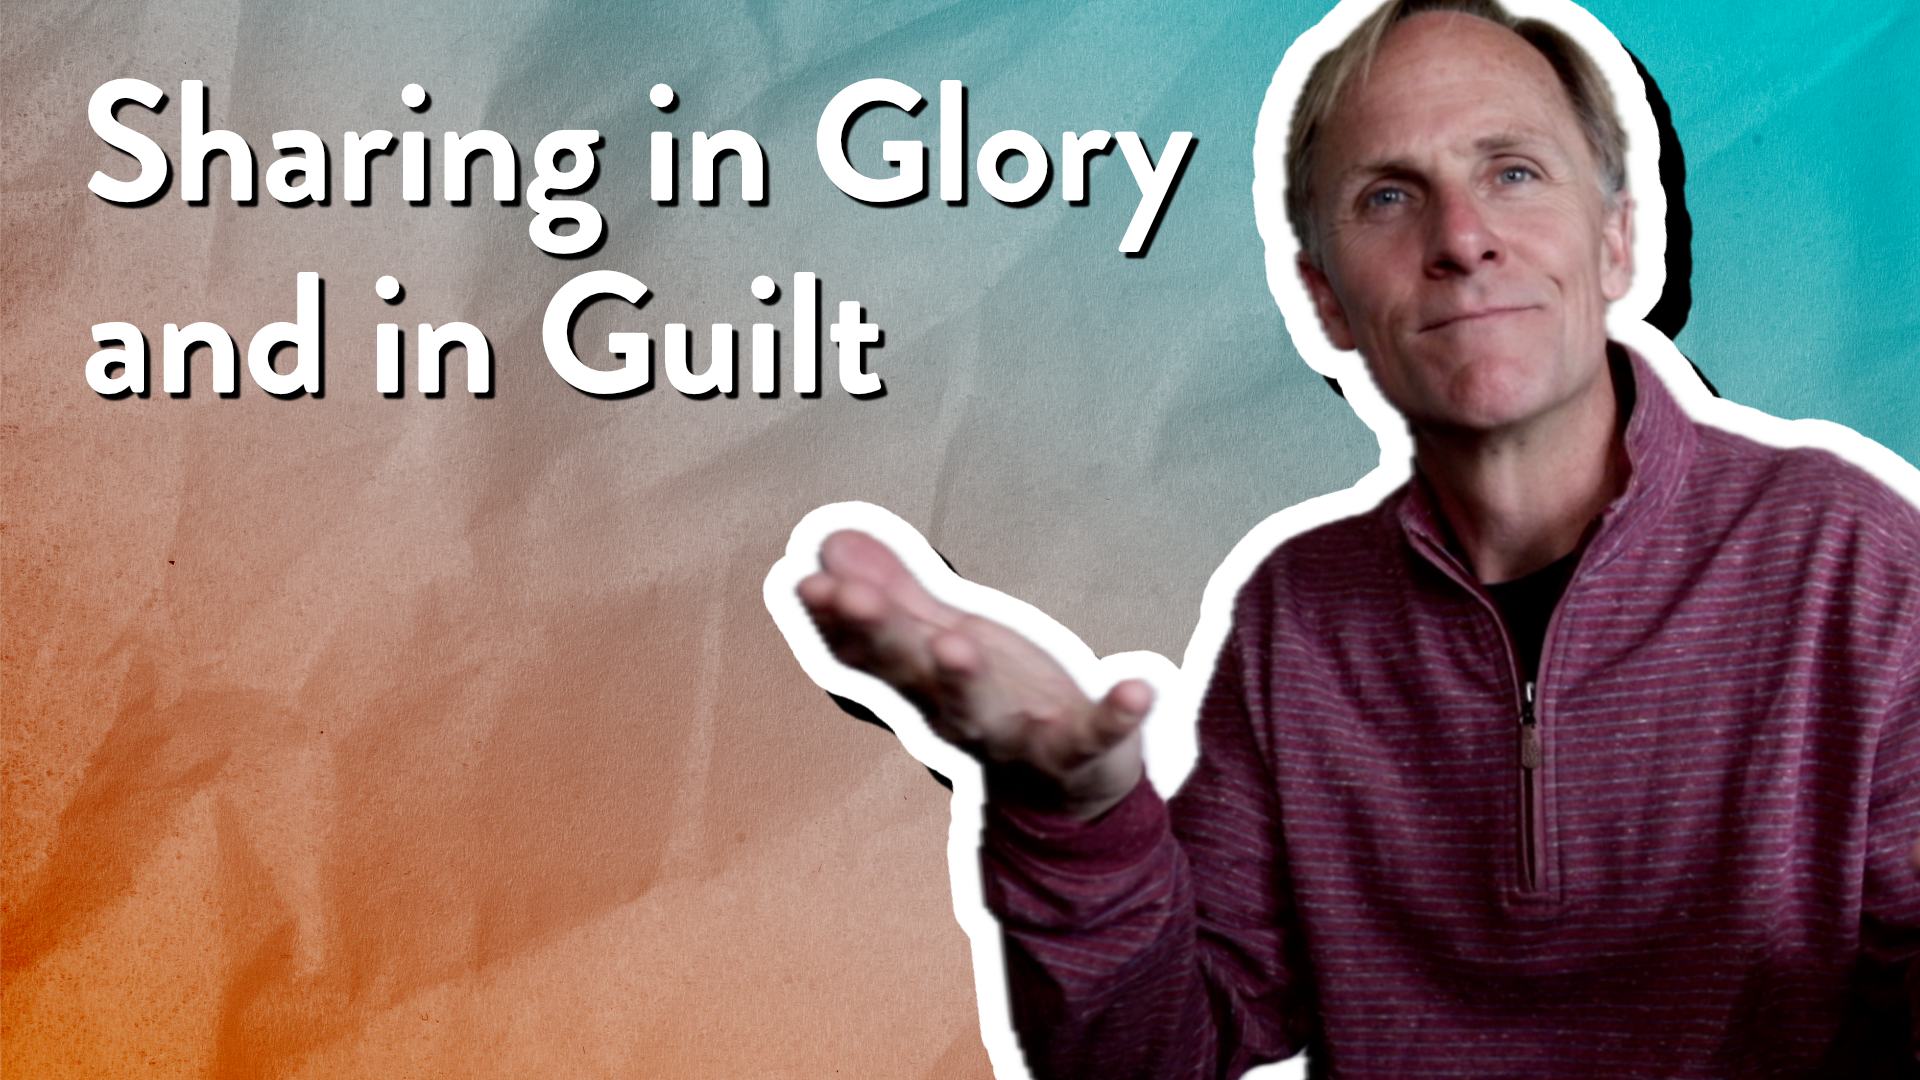 Sharing in Glory and in Guilt